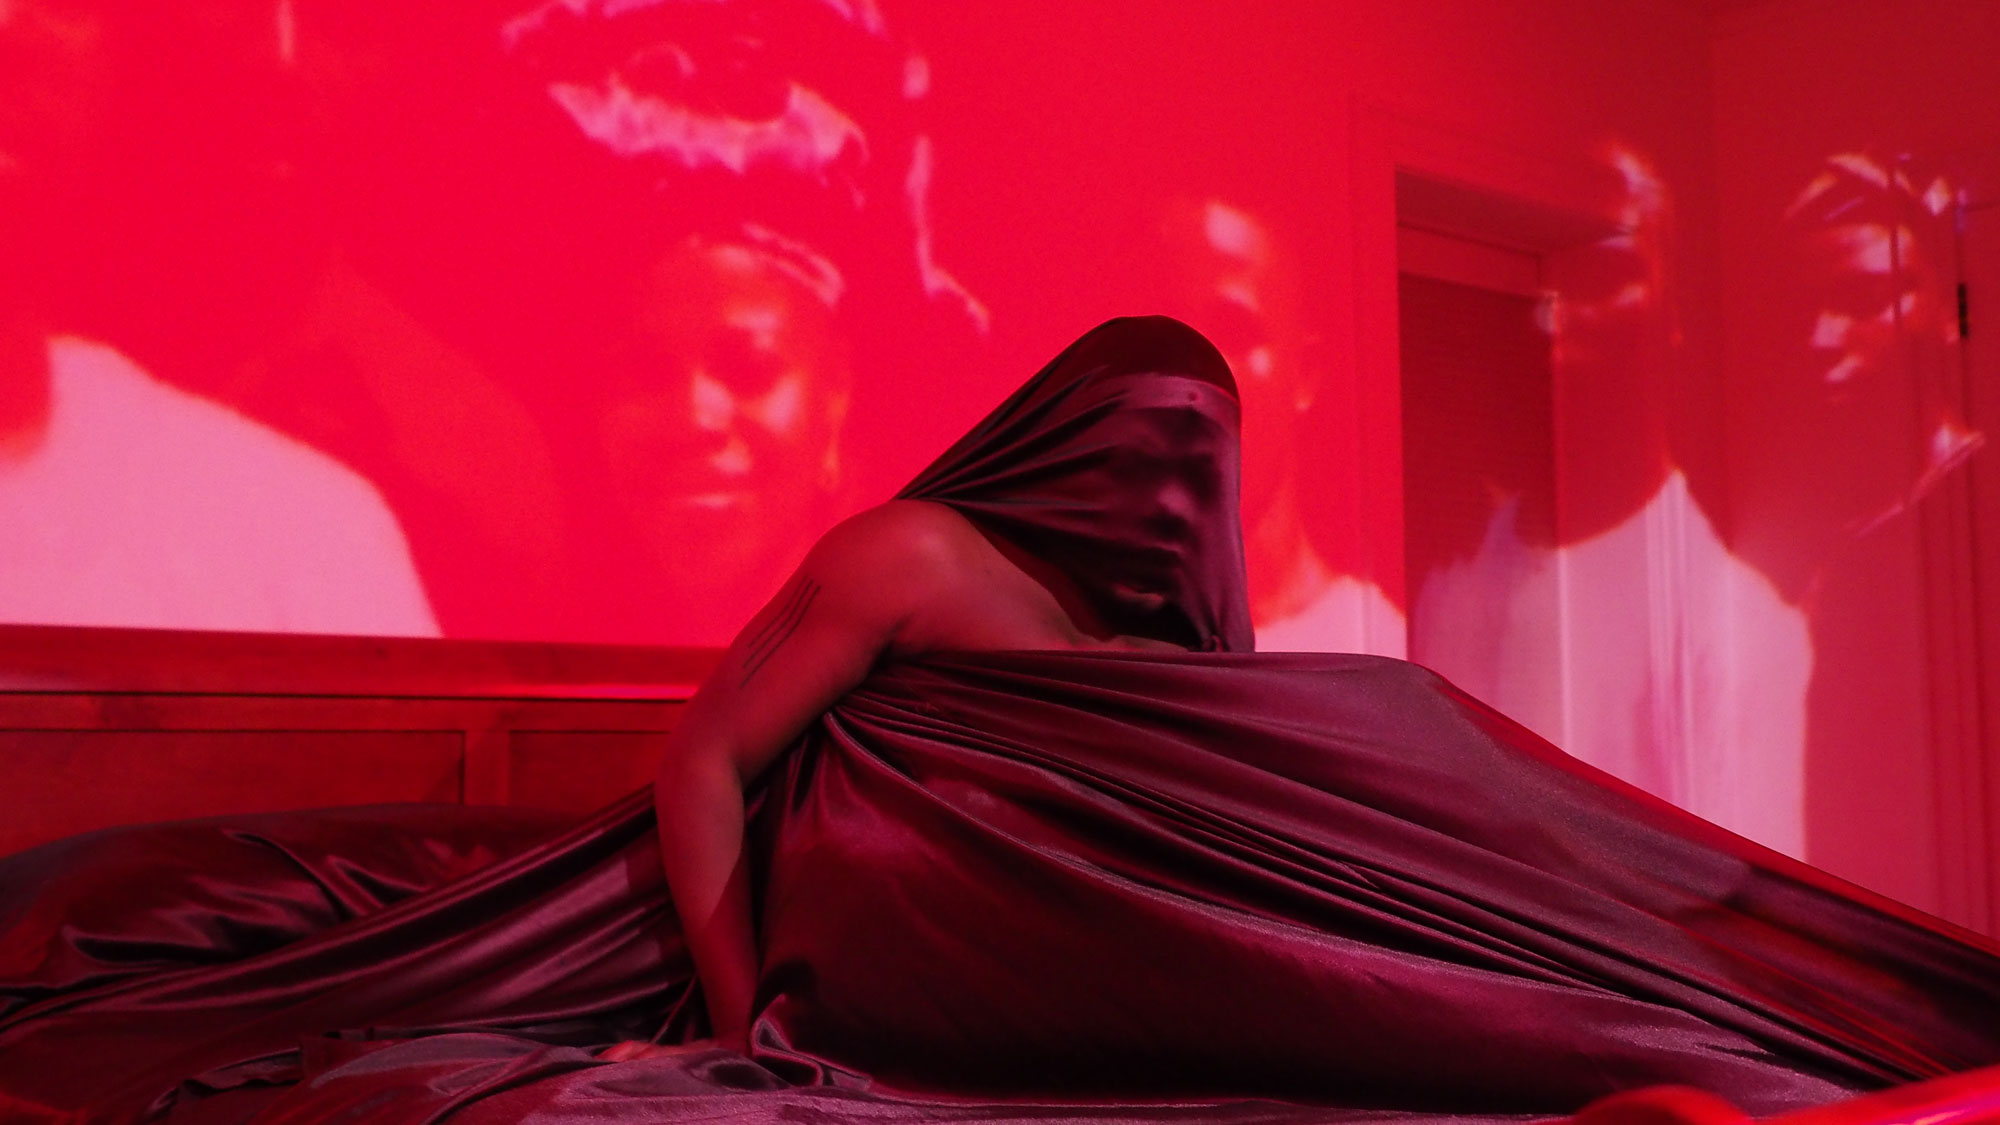 A shirtless Black man giving a guttural cry with his head covered in brown silk sheets. Images of ancestors projected behind him in a room washed in red light. 